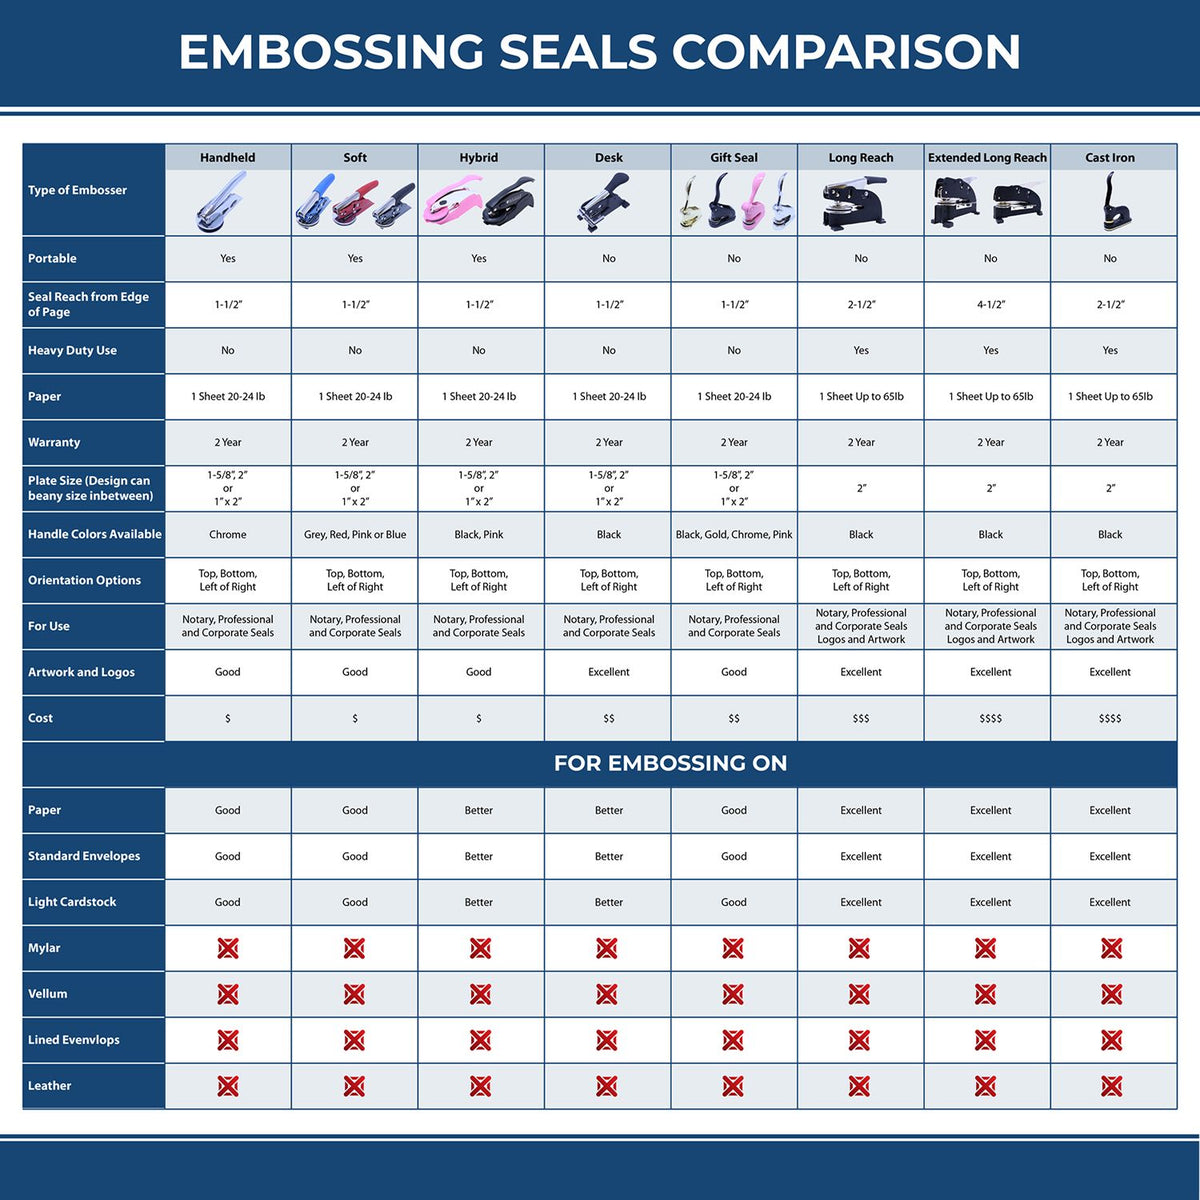 A comparison chart for the different types of mount models available for the Hybrid Nebraska Engineer Seal